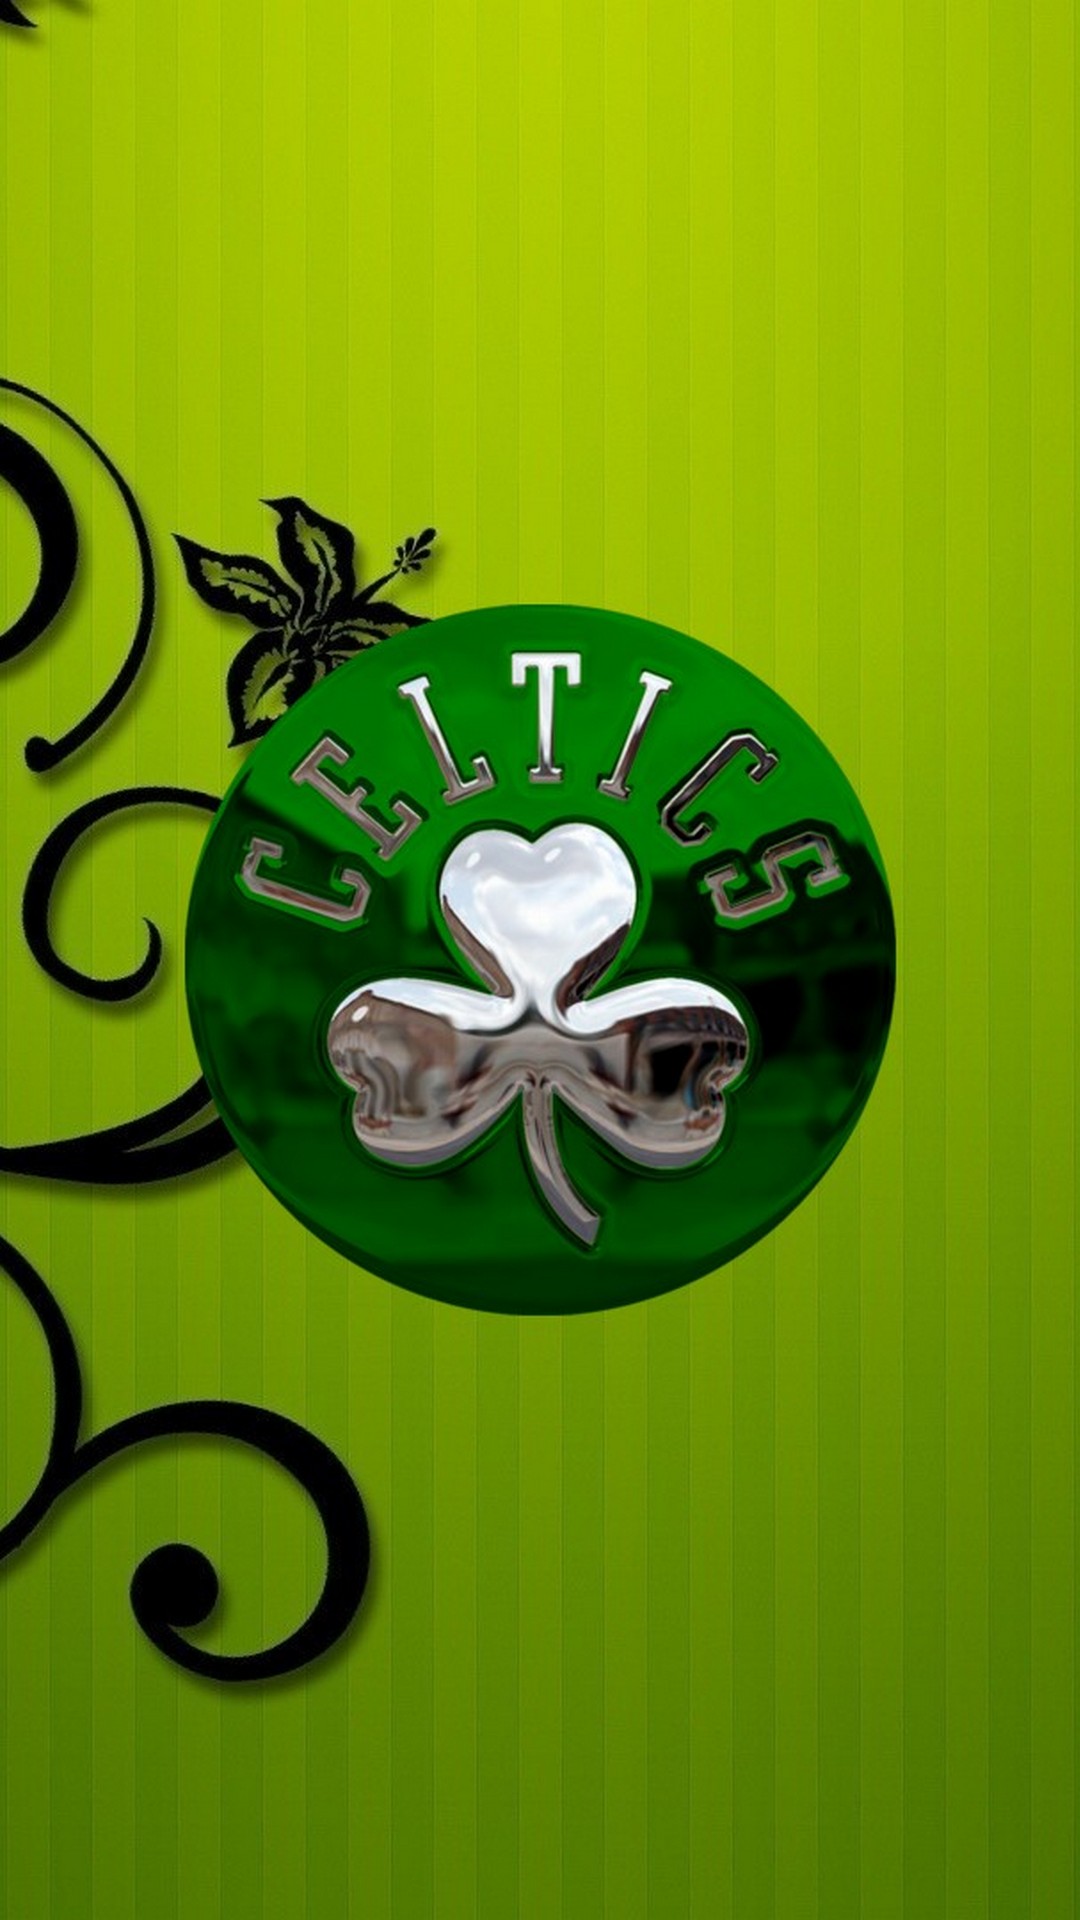 Boston Celtics HD Wallpapers For Mobile With Resolution 1080X1920 pixel. You can make this wallpaper for your Desktop Computer Backgrounds, Mac Wallpapers, Android Lock screen or iPhone Screensavers